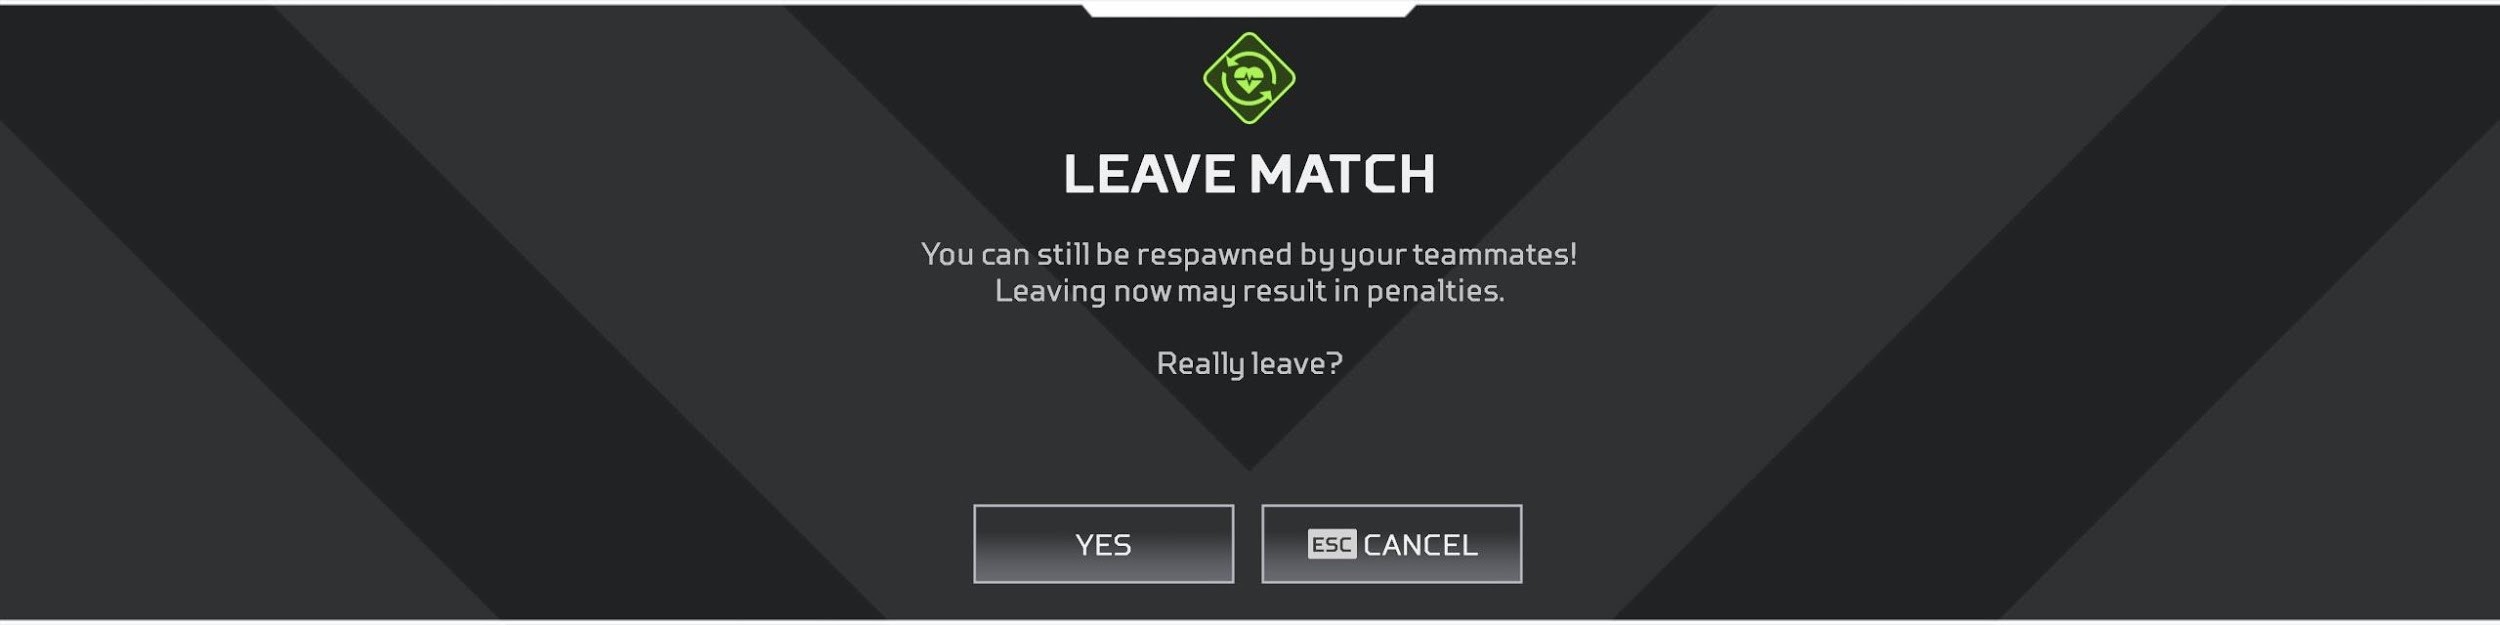 Leave Match Page